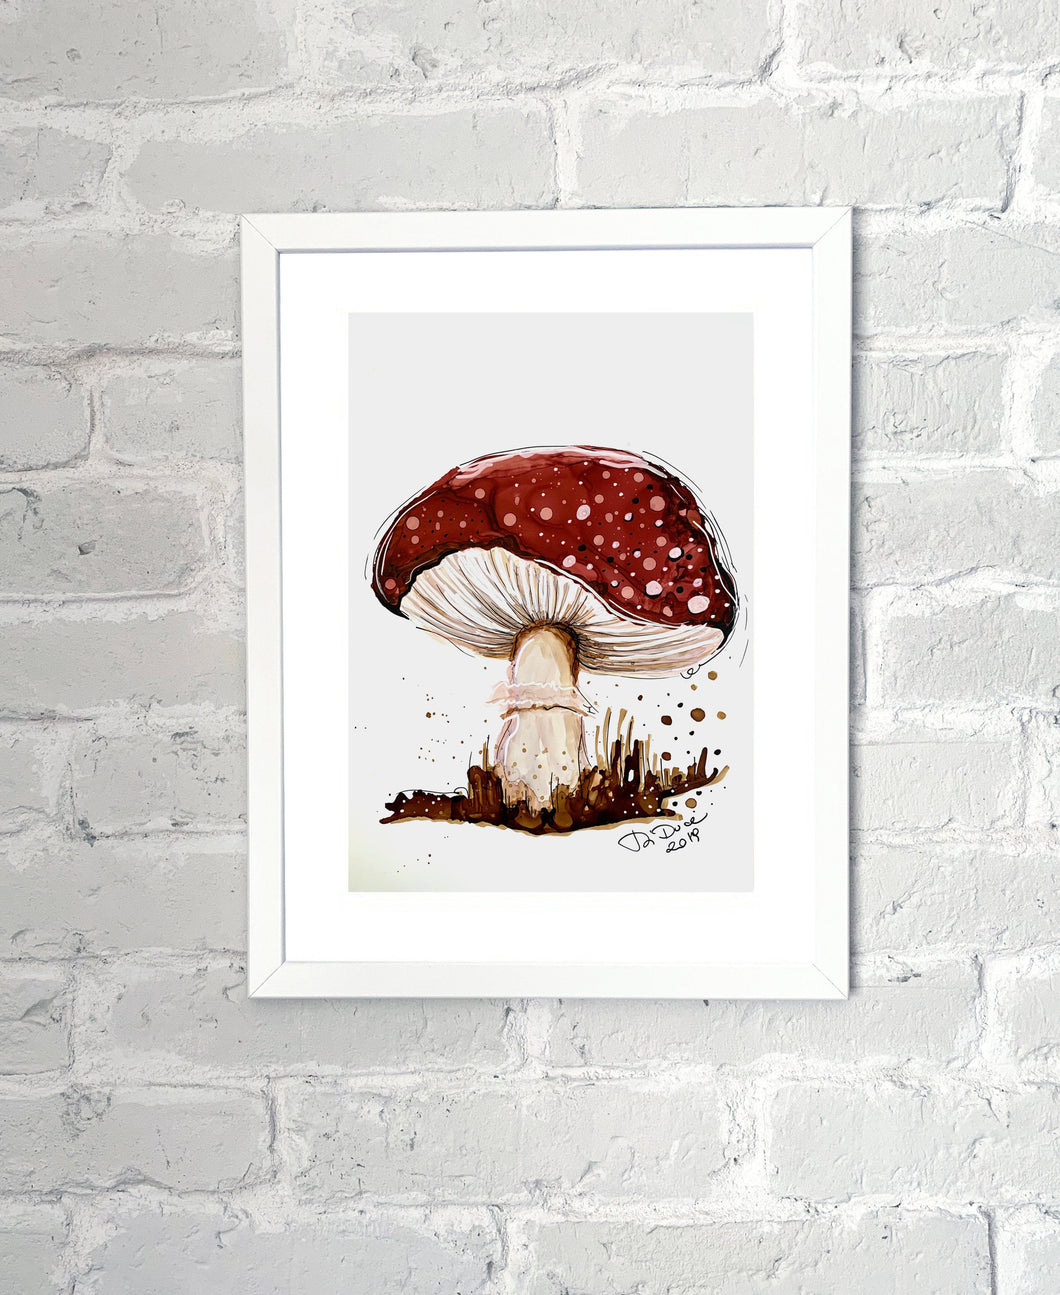 Mysterious toadstool - Alcohol Ink Painting on Yupo Paper